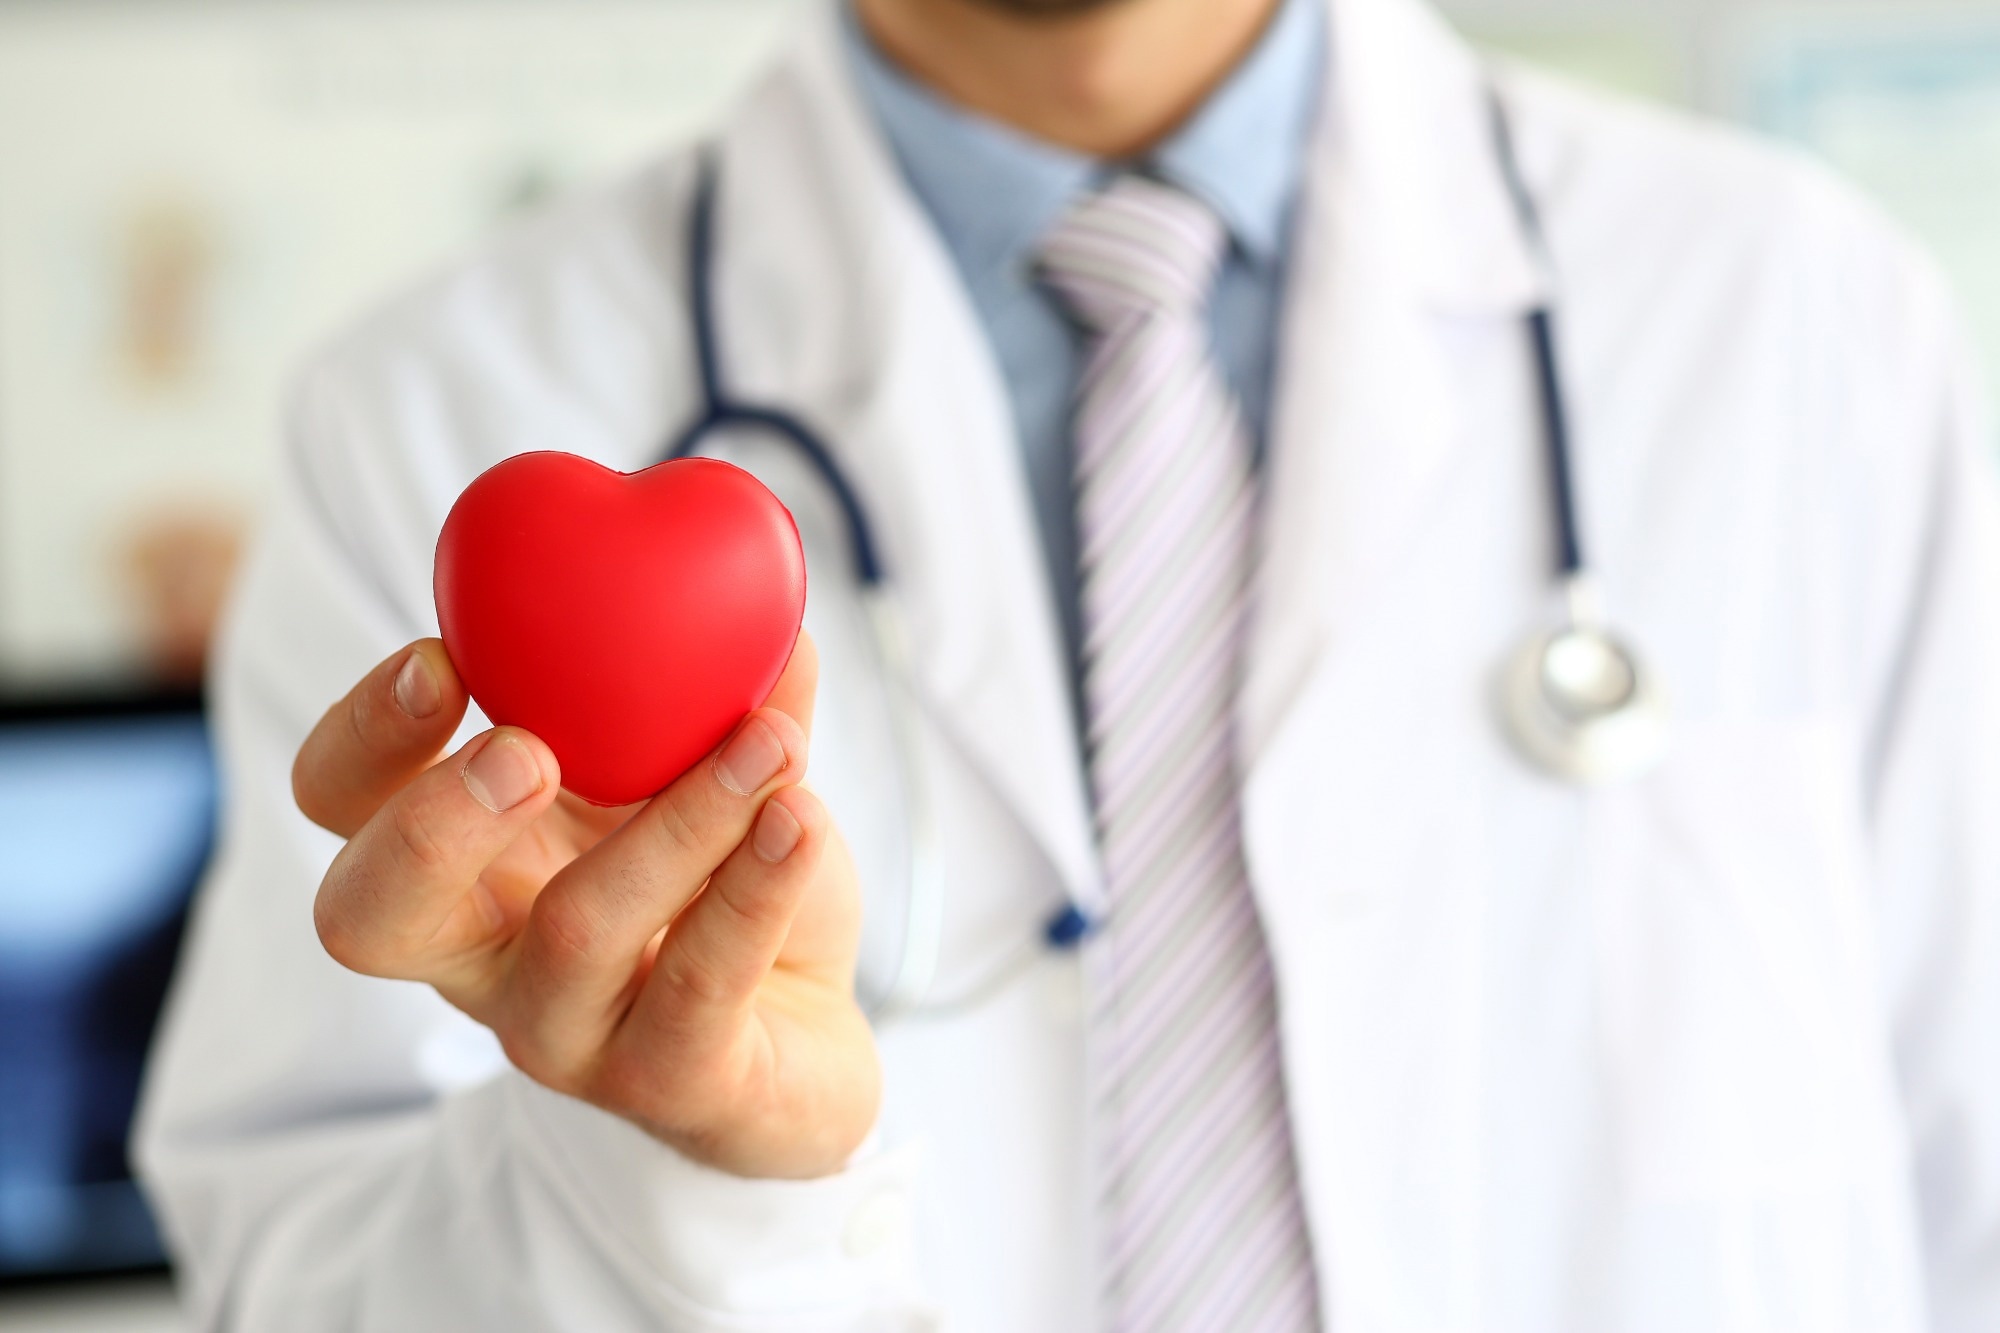 Study: Long-term risk of major adverse cardiovascular events following ischemic stroke or TIA. Image Credit: H_Ko/Shutterstock.com